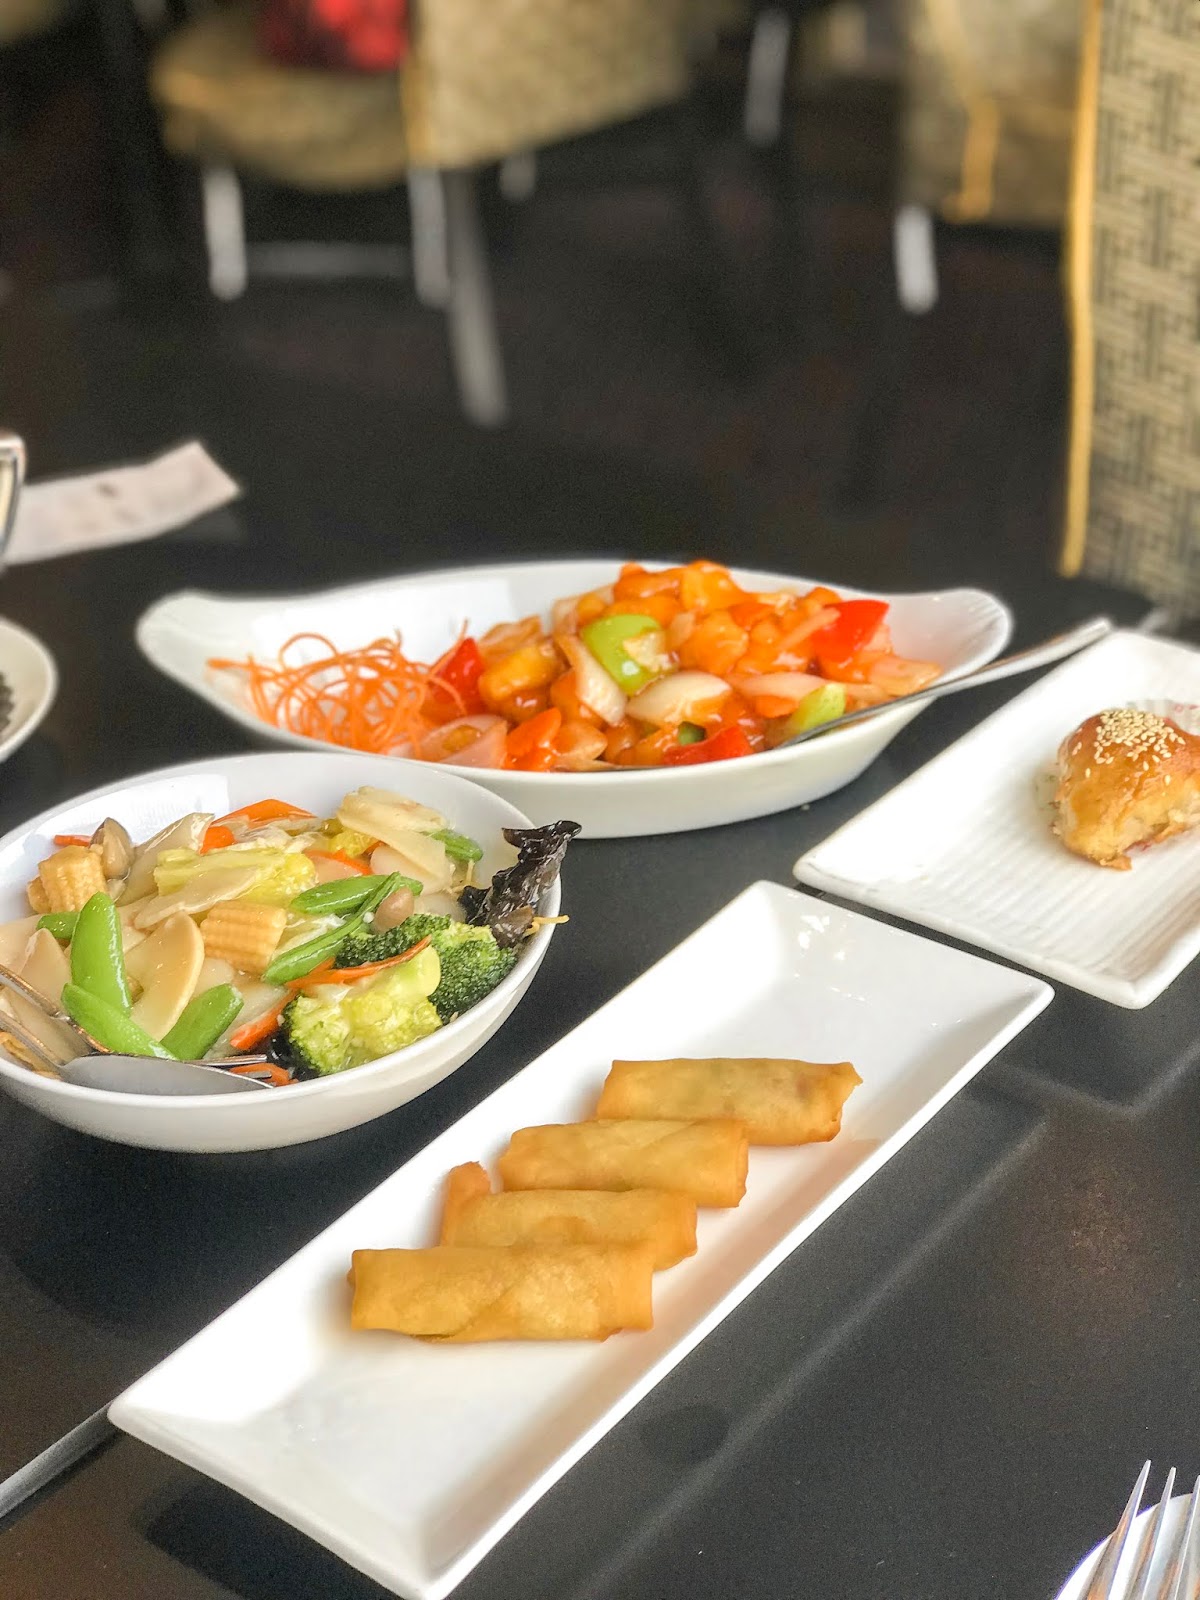 FOOD: Royal China Fulham Restaurant Review, Food Blogger, Royal China, Chinese Food, UK Blogger, Katie Kirk Loves, Blogger Review, London Blogger, London Restaurant, Fulham Restaurant, Lifestyle Blogger, London Food Review